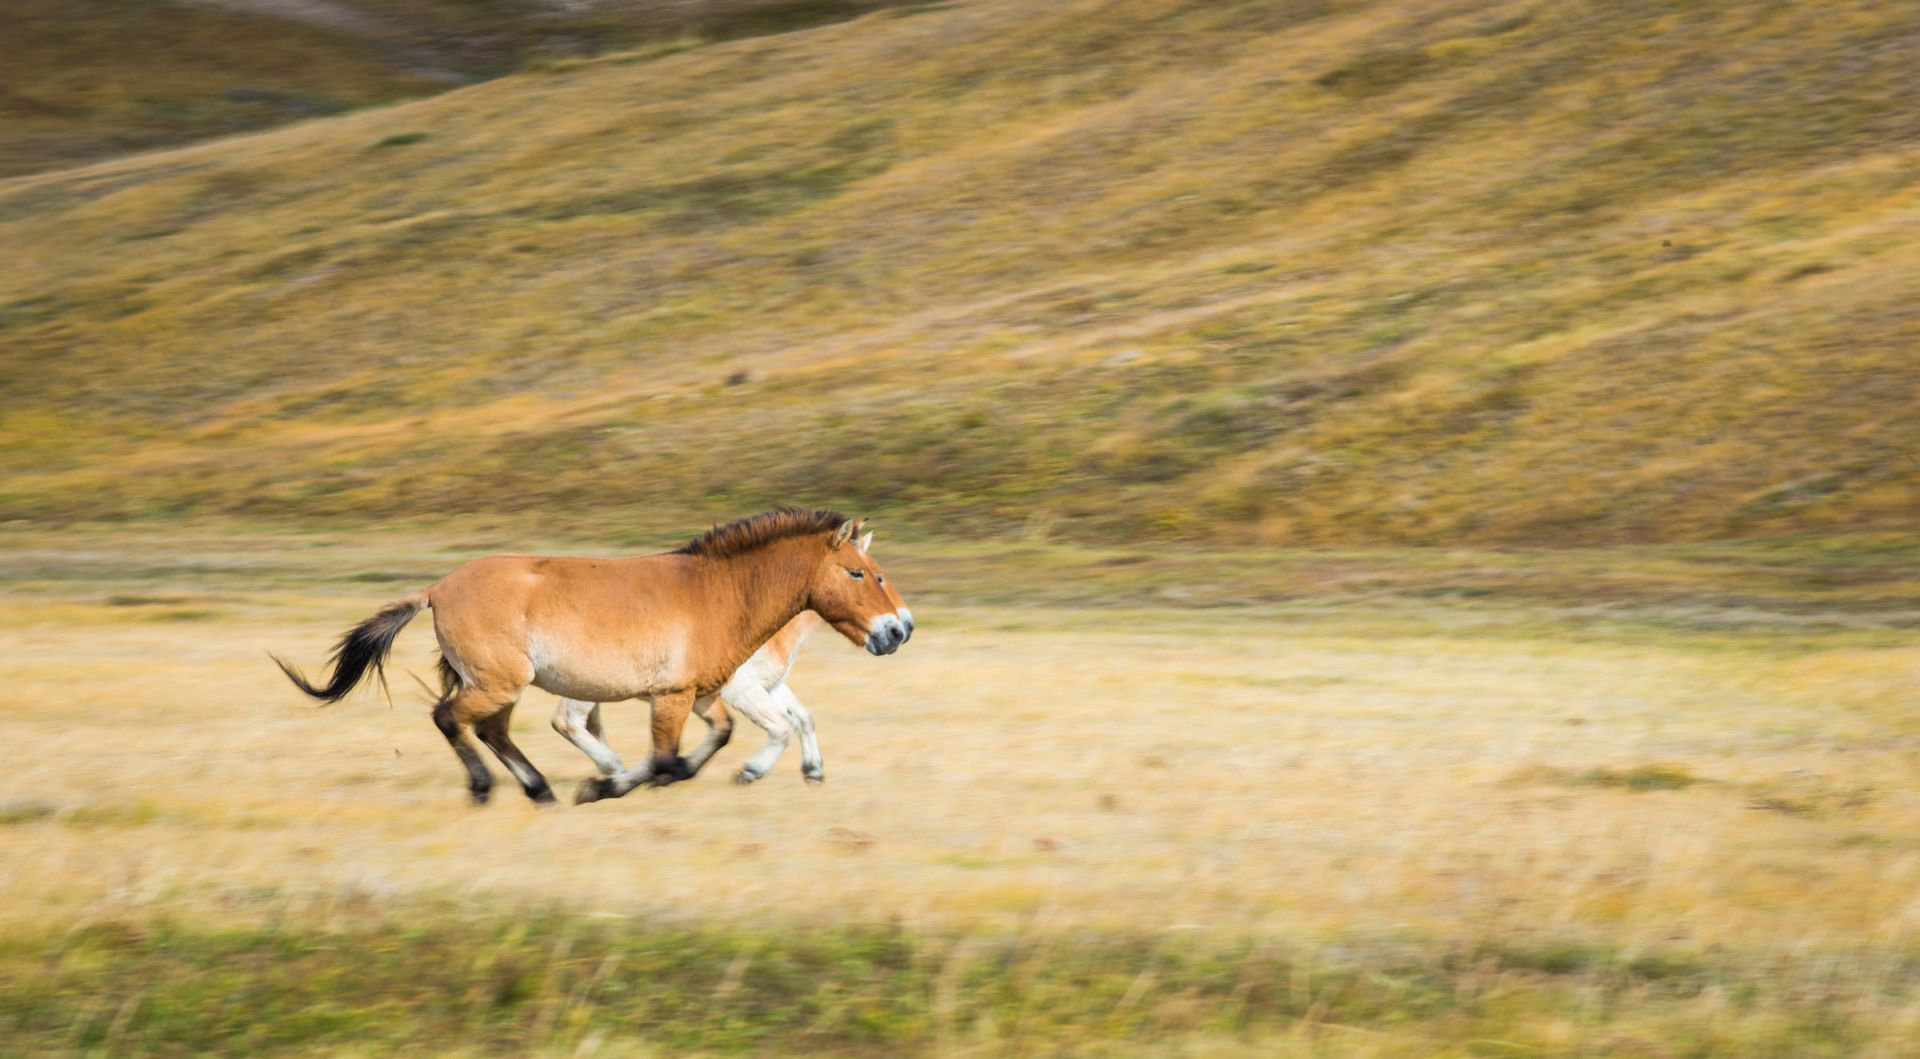 Top places to visit in Mongolia: Hustai National Park with its wild horses